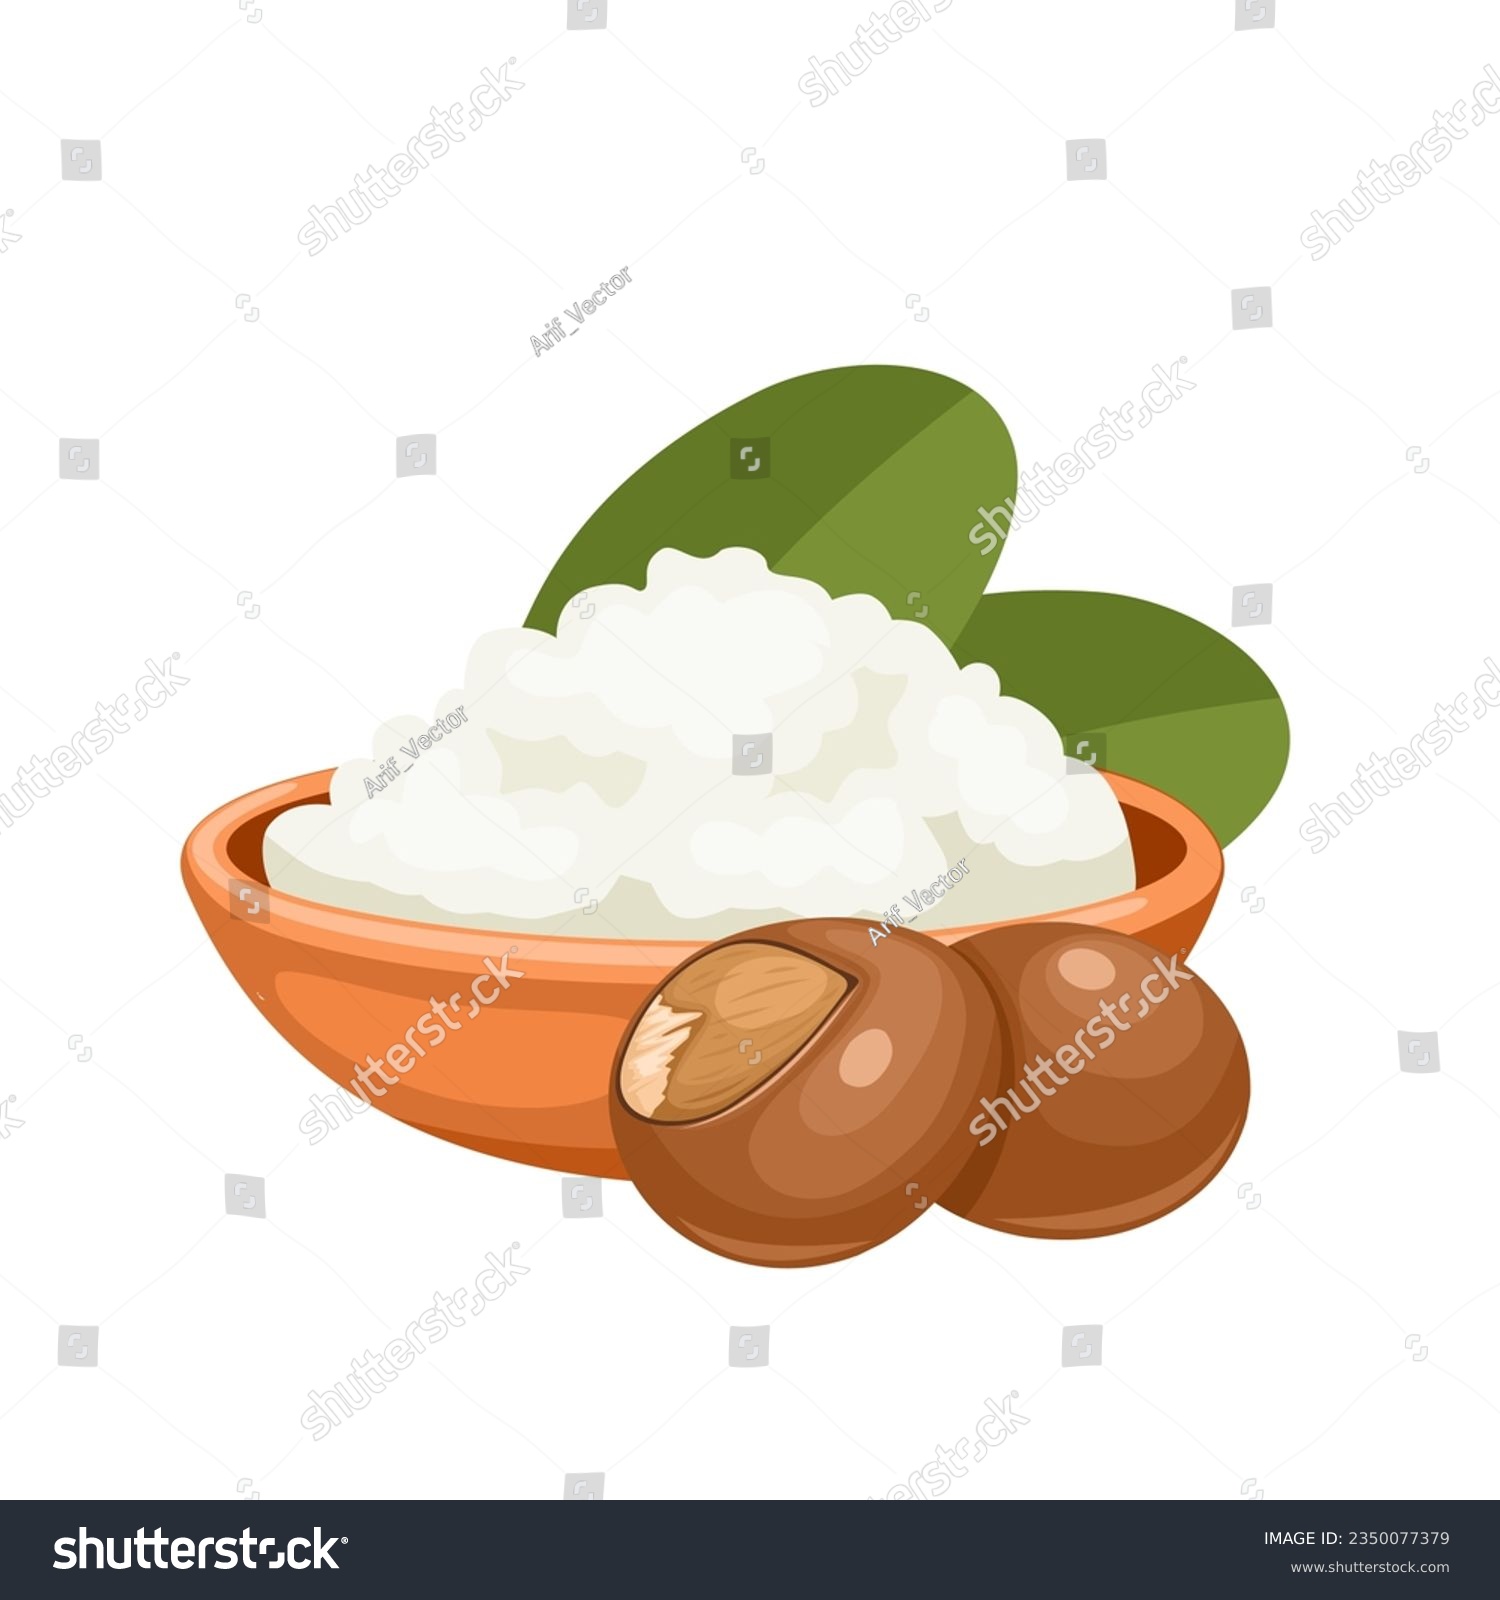 SVG of Vector illustration, shea butter, isolated on white background. svg